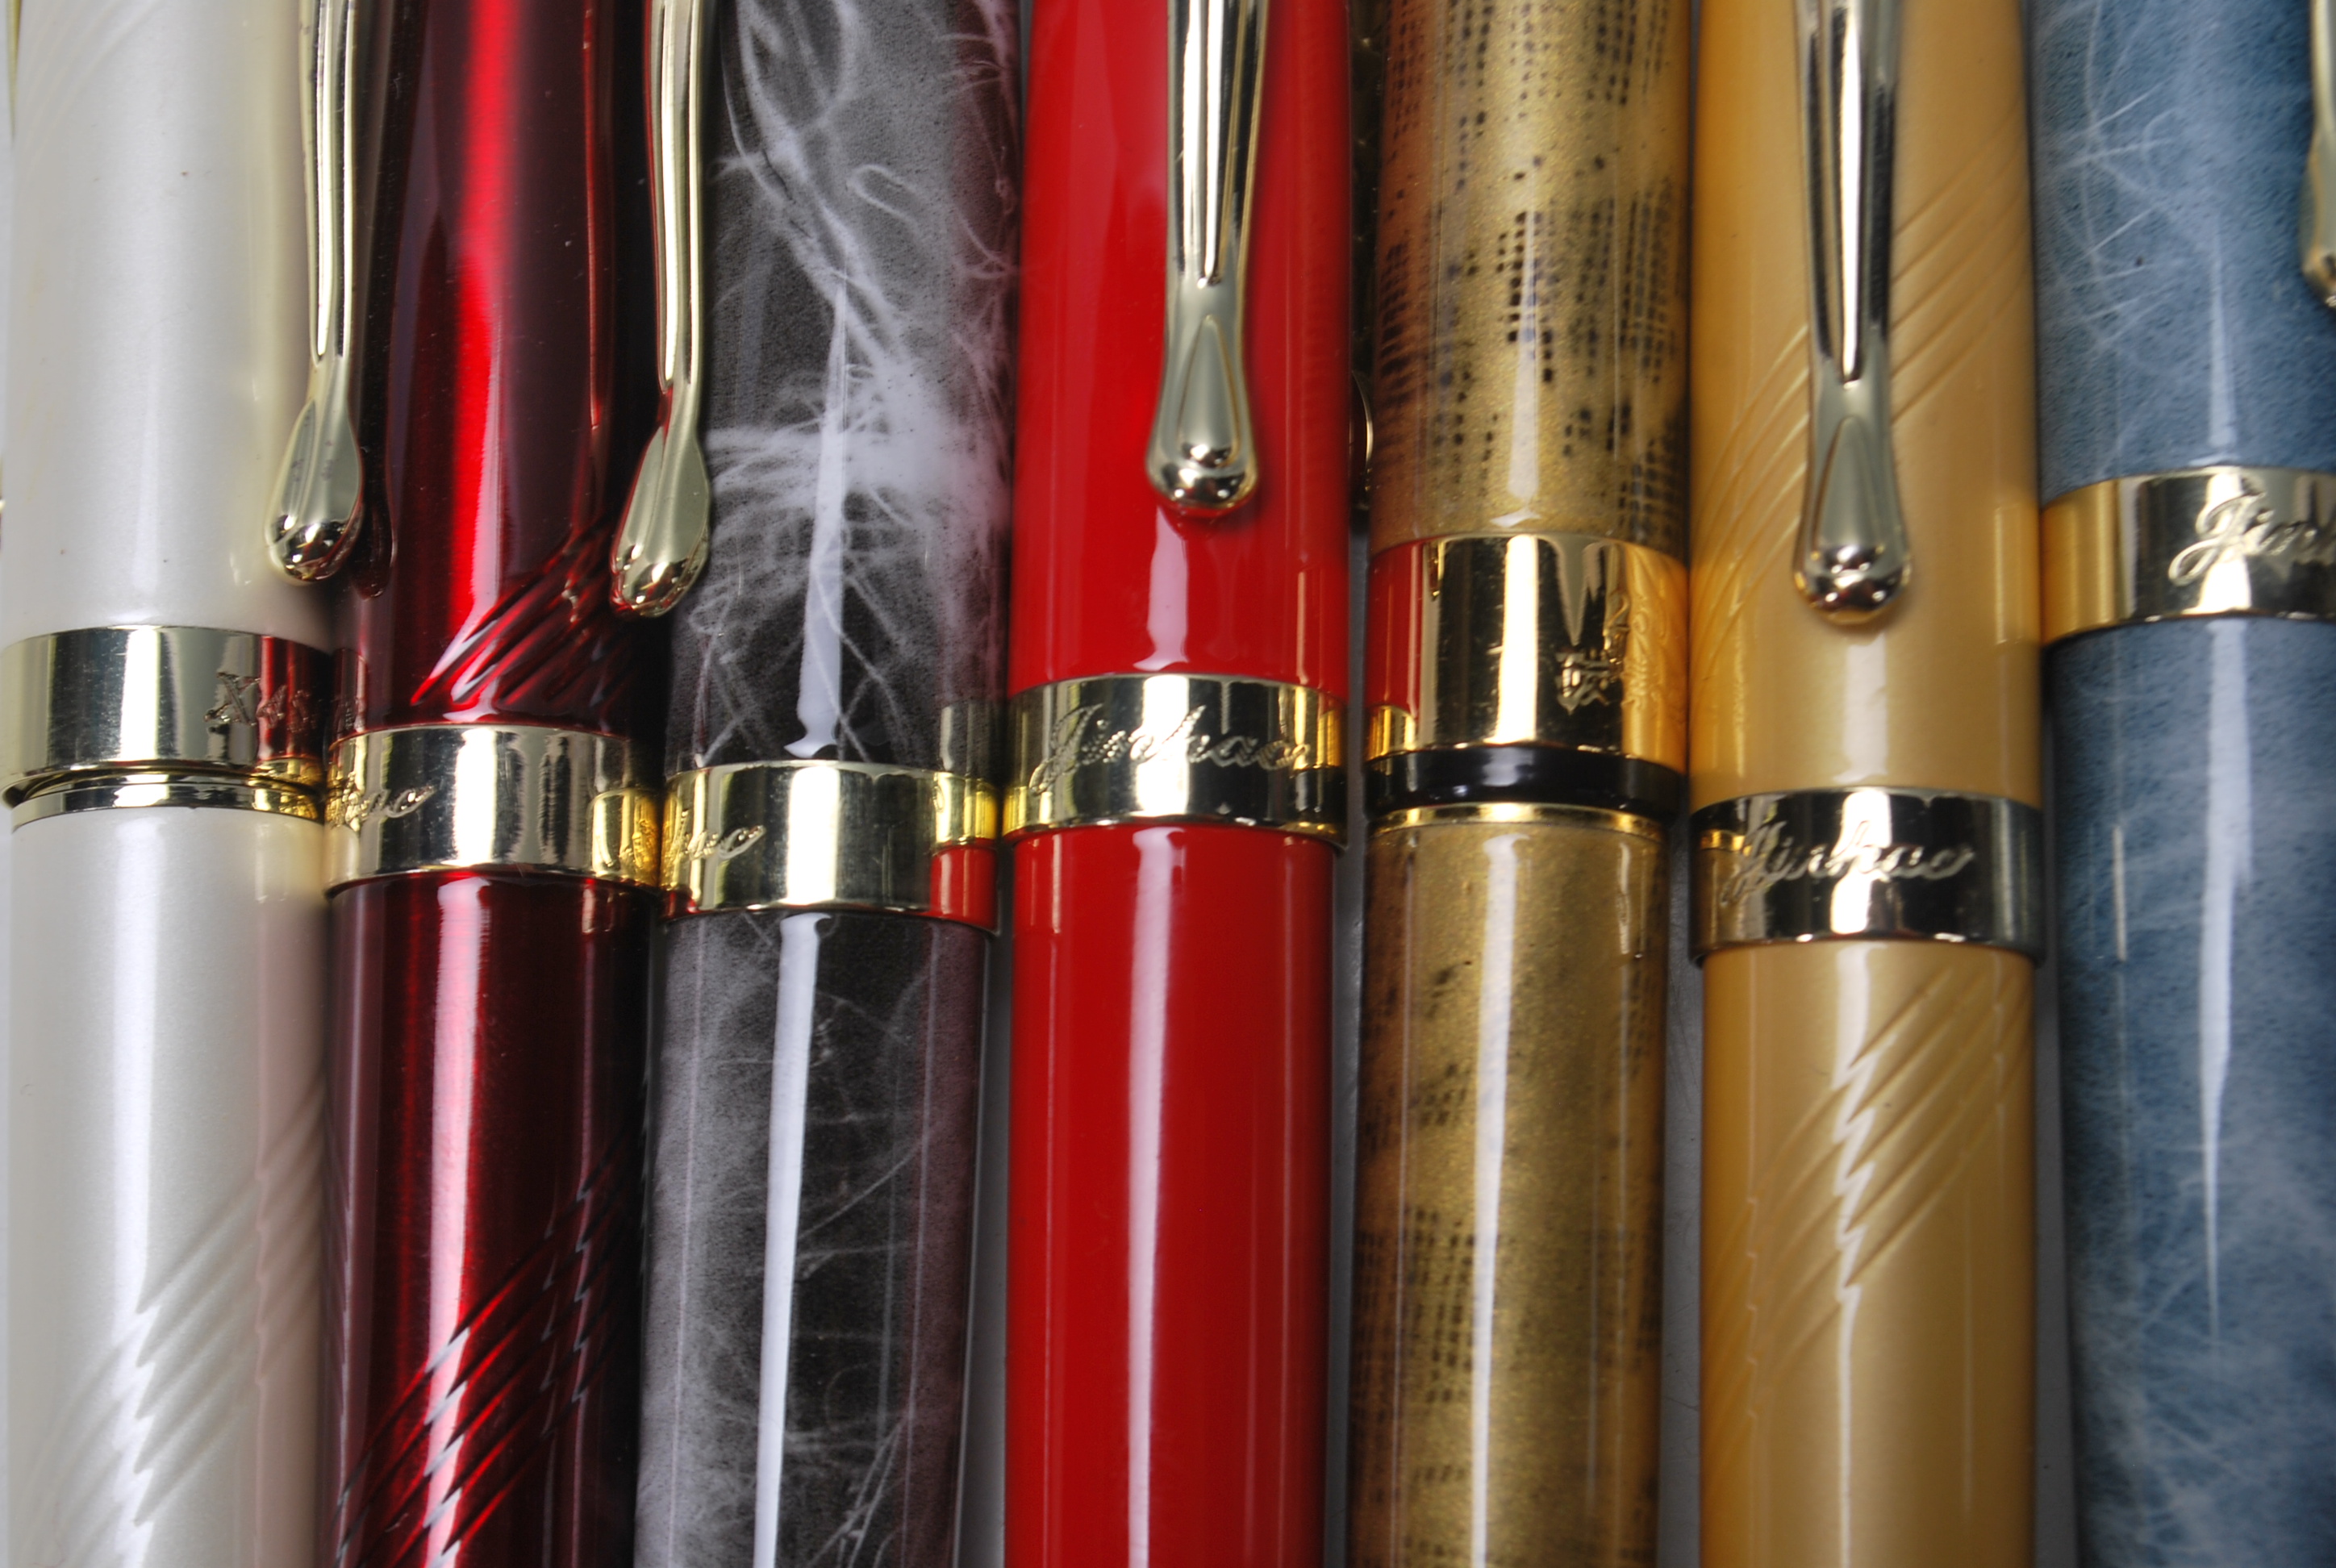 21 CHINESE JINHAO FOUNTAIN PENS - Image 9 of 9